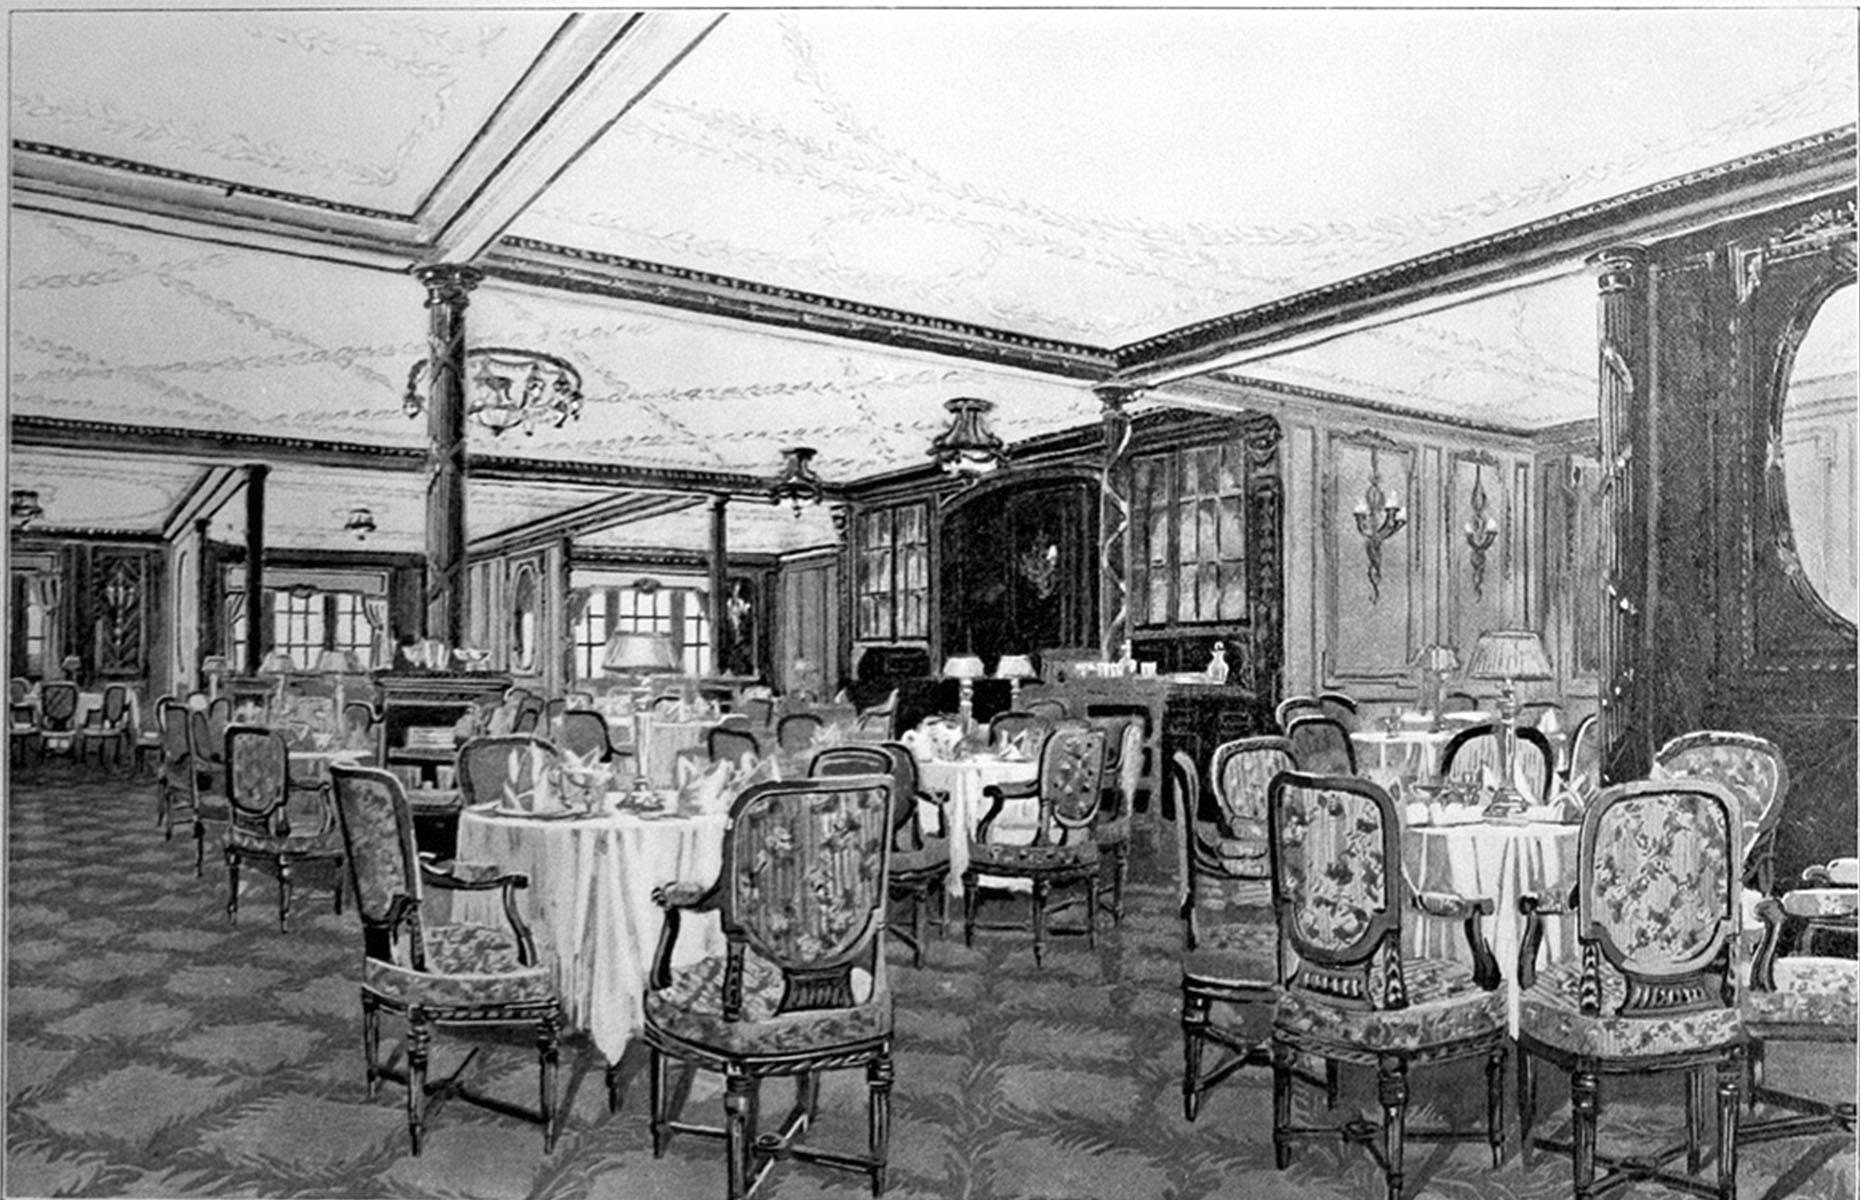 For an extra cost, first-class passengers could book to dine at restaurateur Luigi Gatti’s intimate à la carte restaurant nicknamed the “Ritz” (pictured). The elegant space was fully carpeted with French walnut-paneled walls and picture windows. Small tables were lit by crystal lamps and guests could eat any time between 8am and 11pm, which made it a popular choice. Gatti and the majority of the kitchen staff died when the Titanic sank.